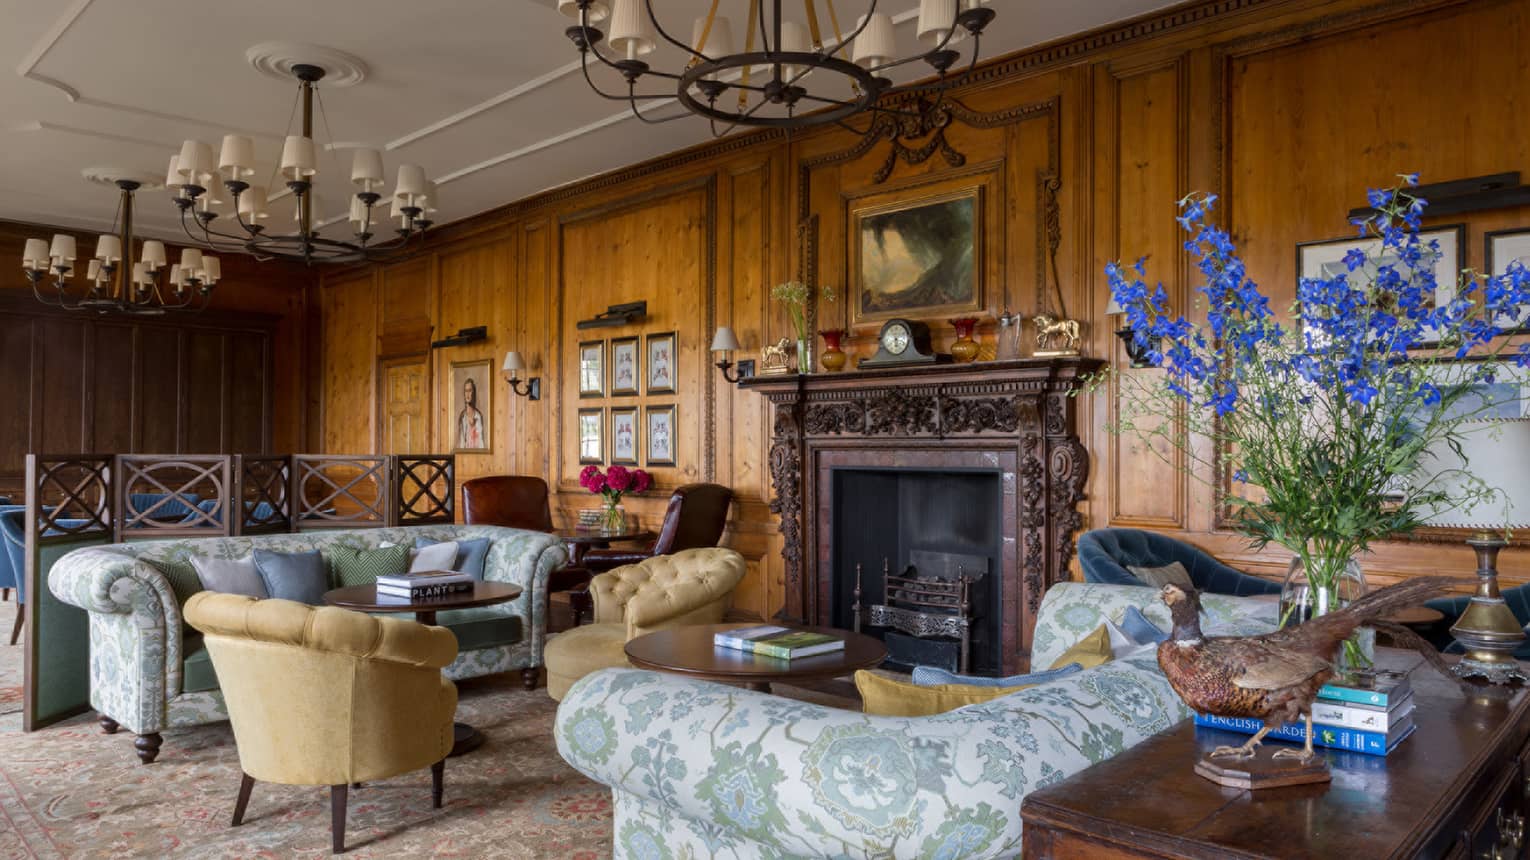 The Library, antique-style blue floral sofas, armchairs, rustic wood walls, soaring ceilings